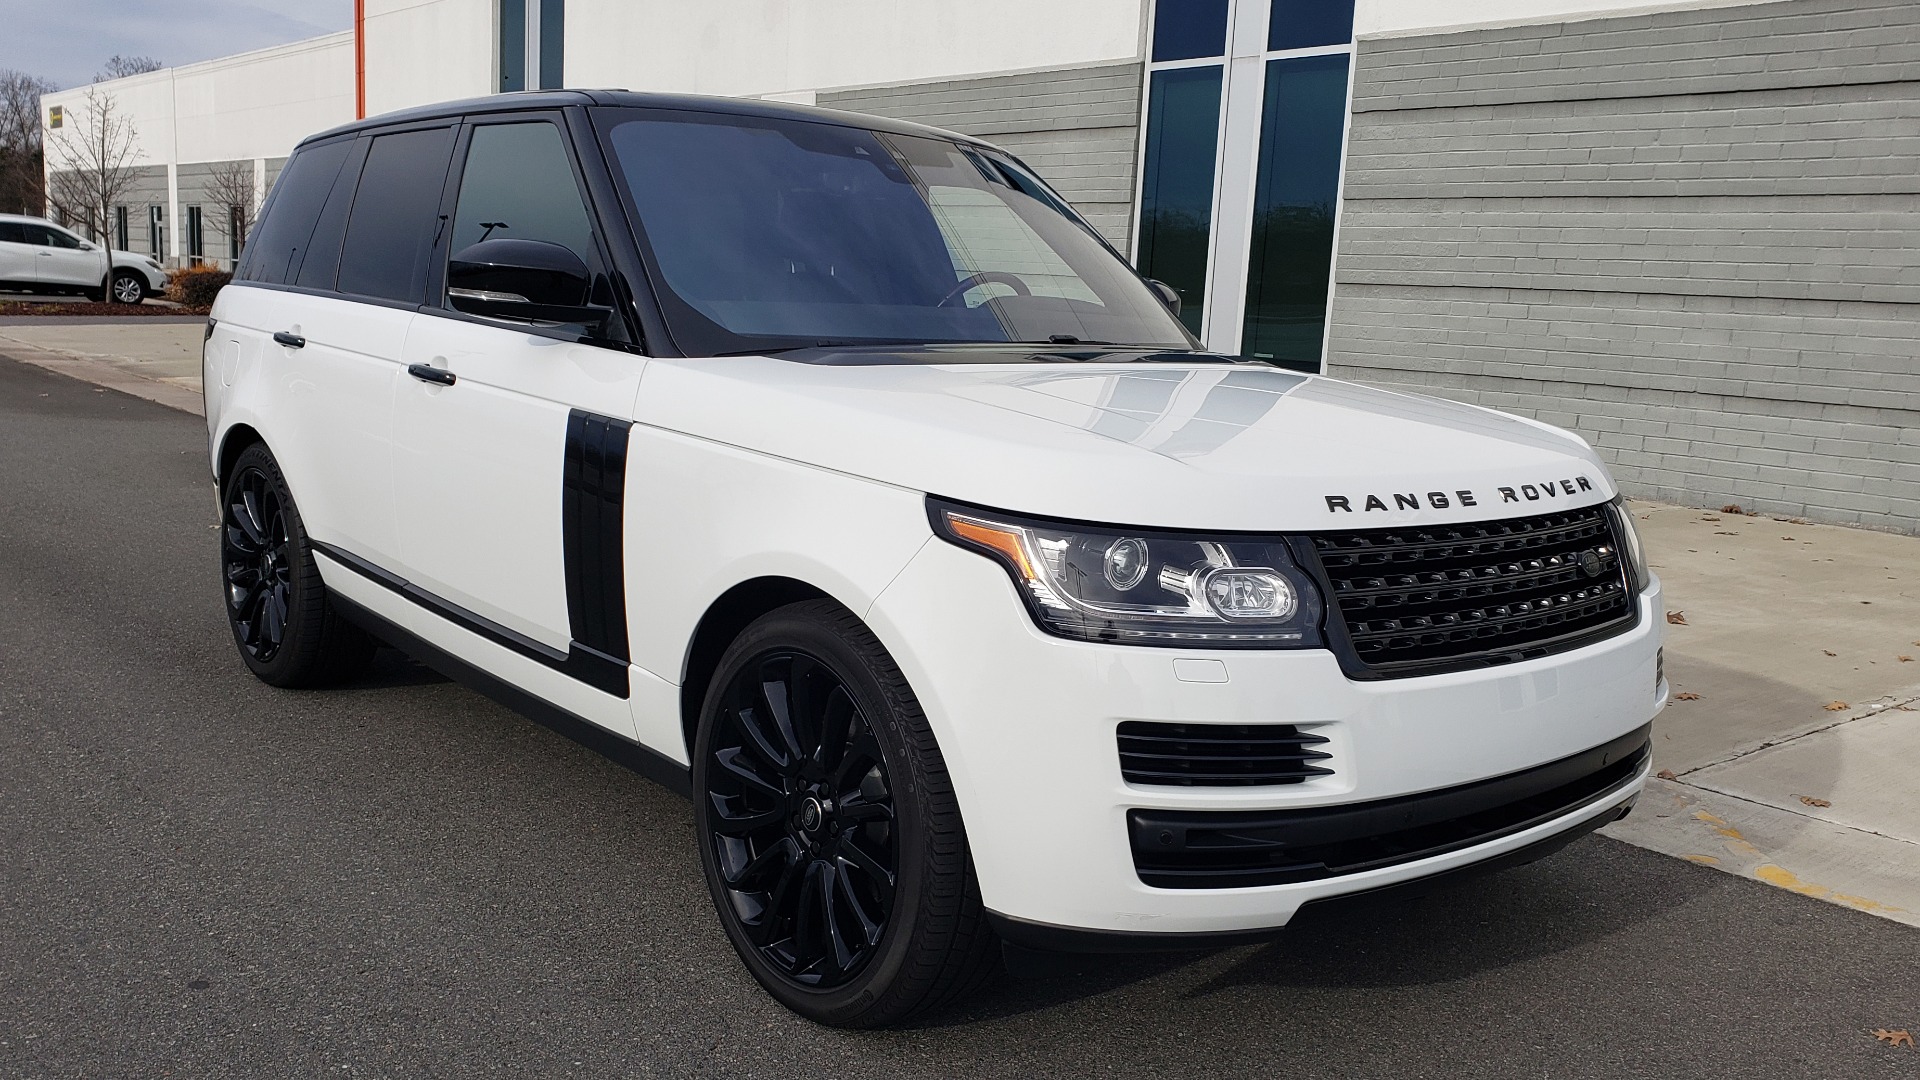 Used 2017 Land Rover RANGE ROVER HSE TD6 DIESEL / 4WD / NAV / MERIDIAN / PANO-ROOF / REARVIEW for sale Sold at Formula Imports in Charlotte NC 28227 7